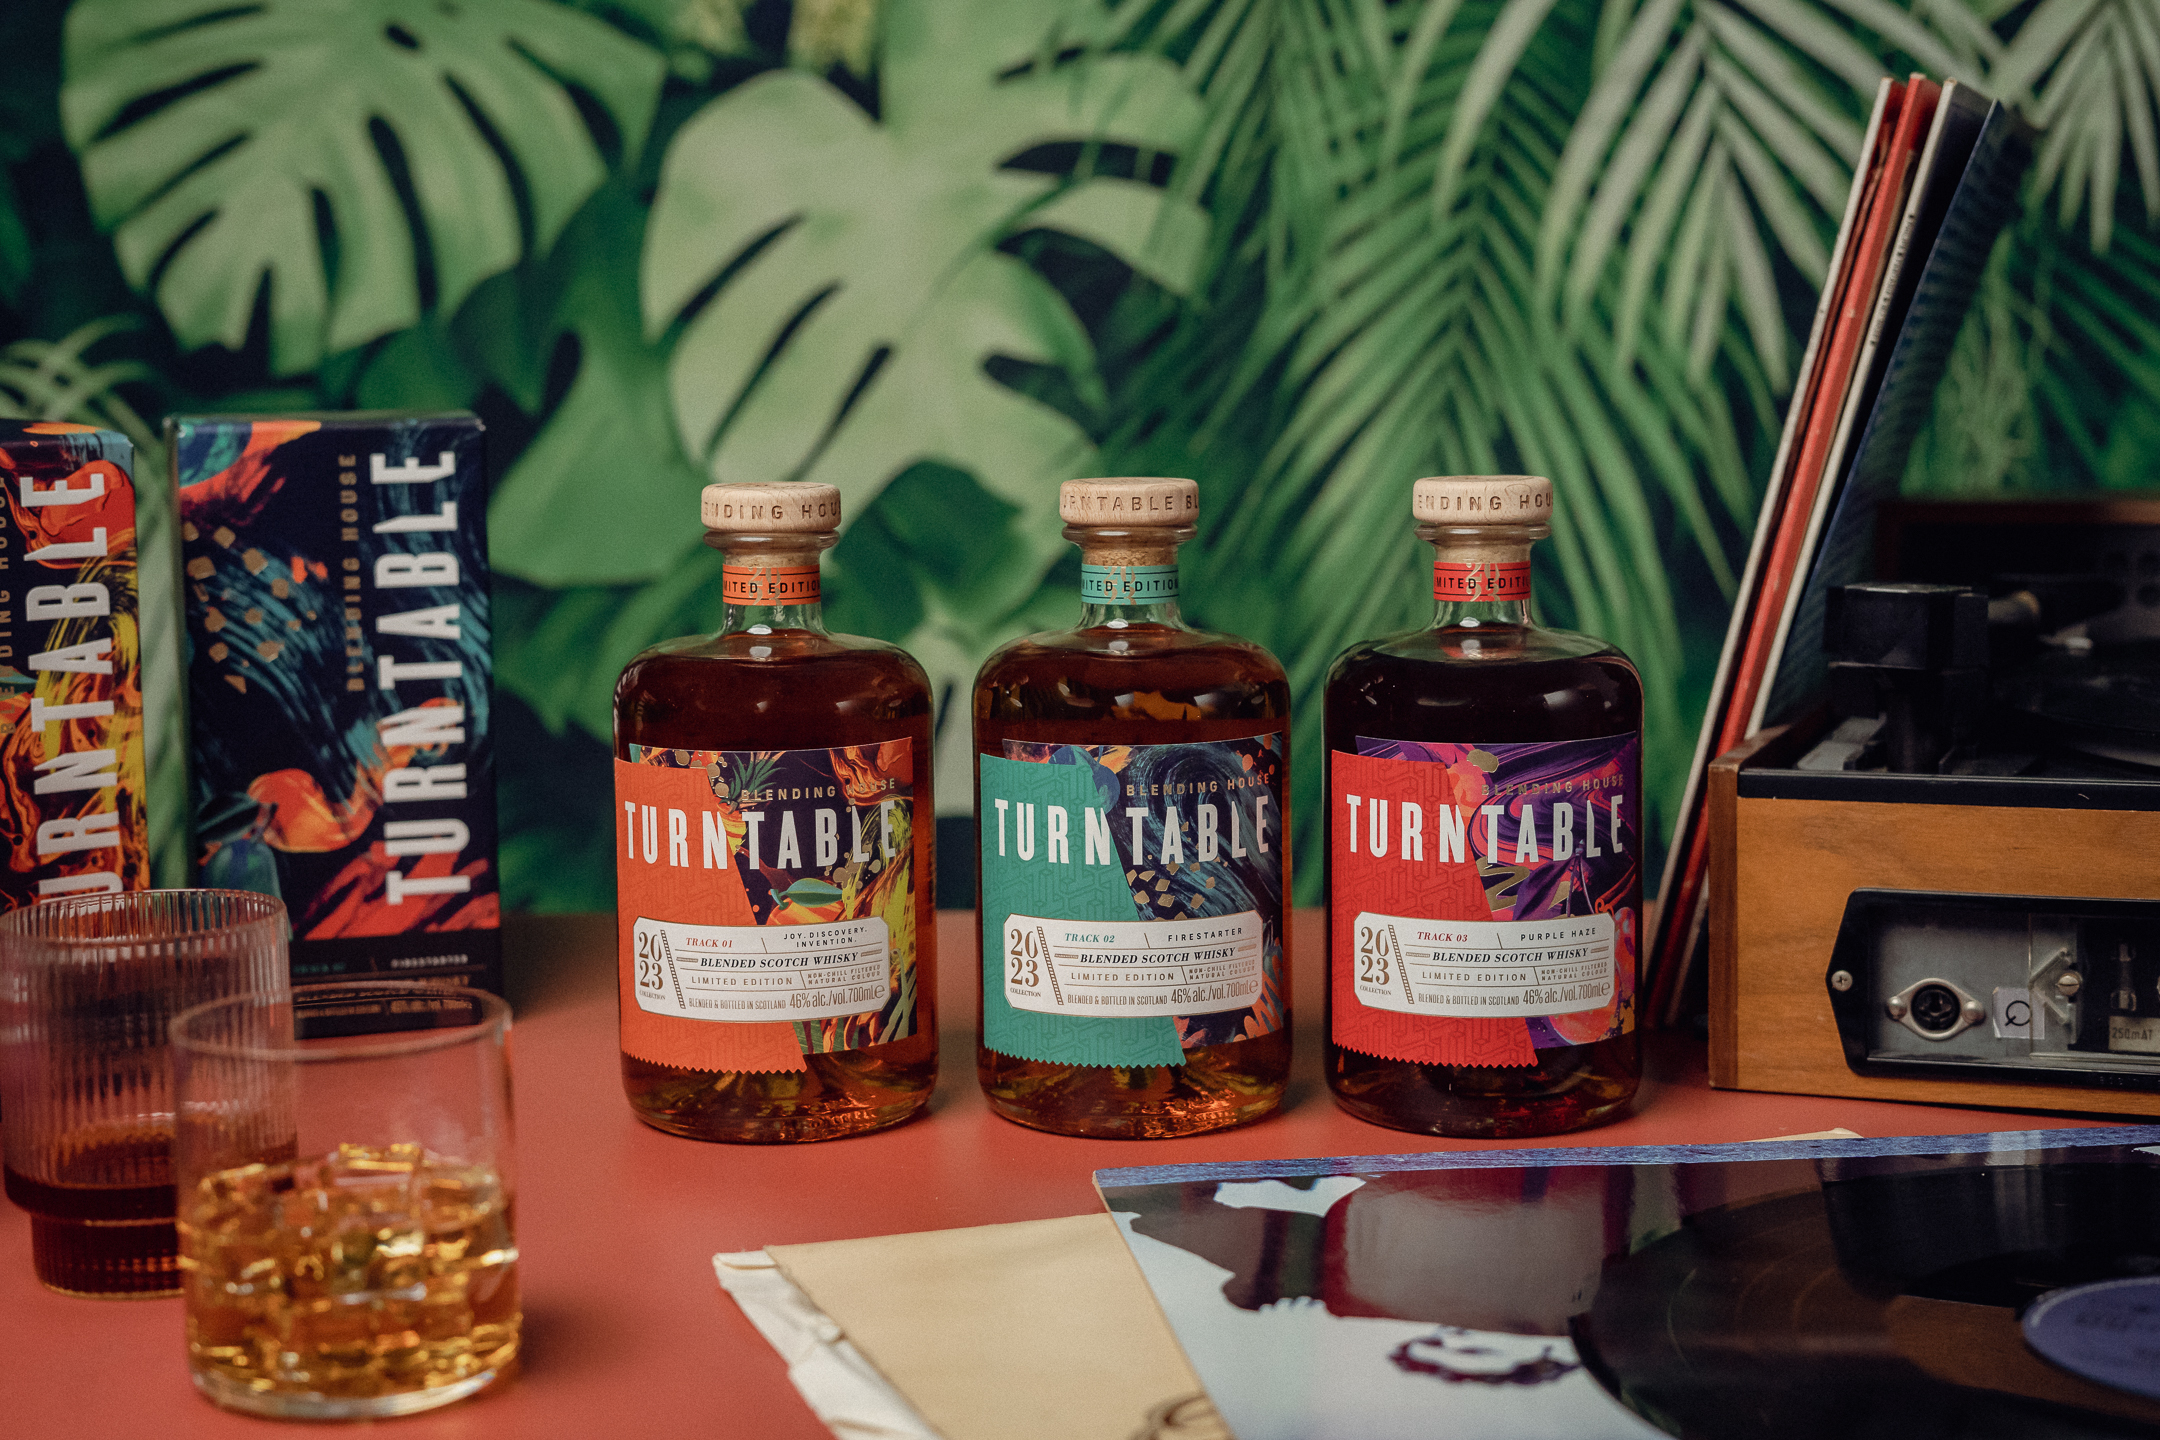 Turntable Blending House legt drei Limited Editions an Blended Scotch Whiskys auf